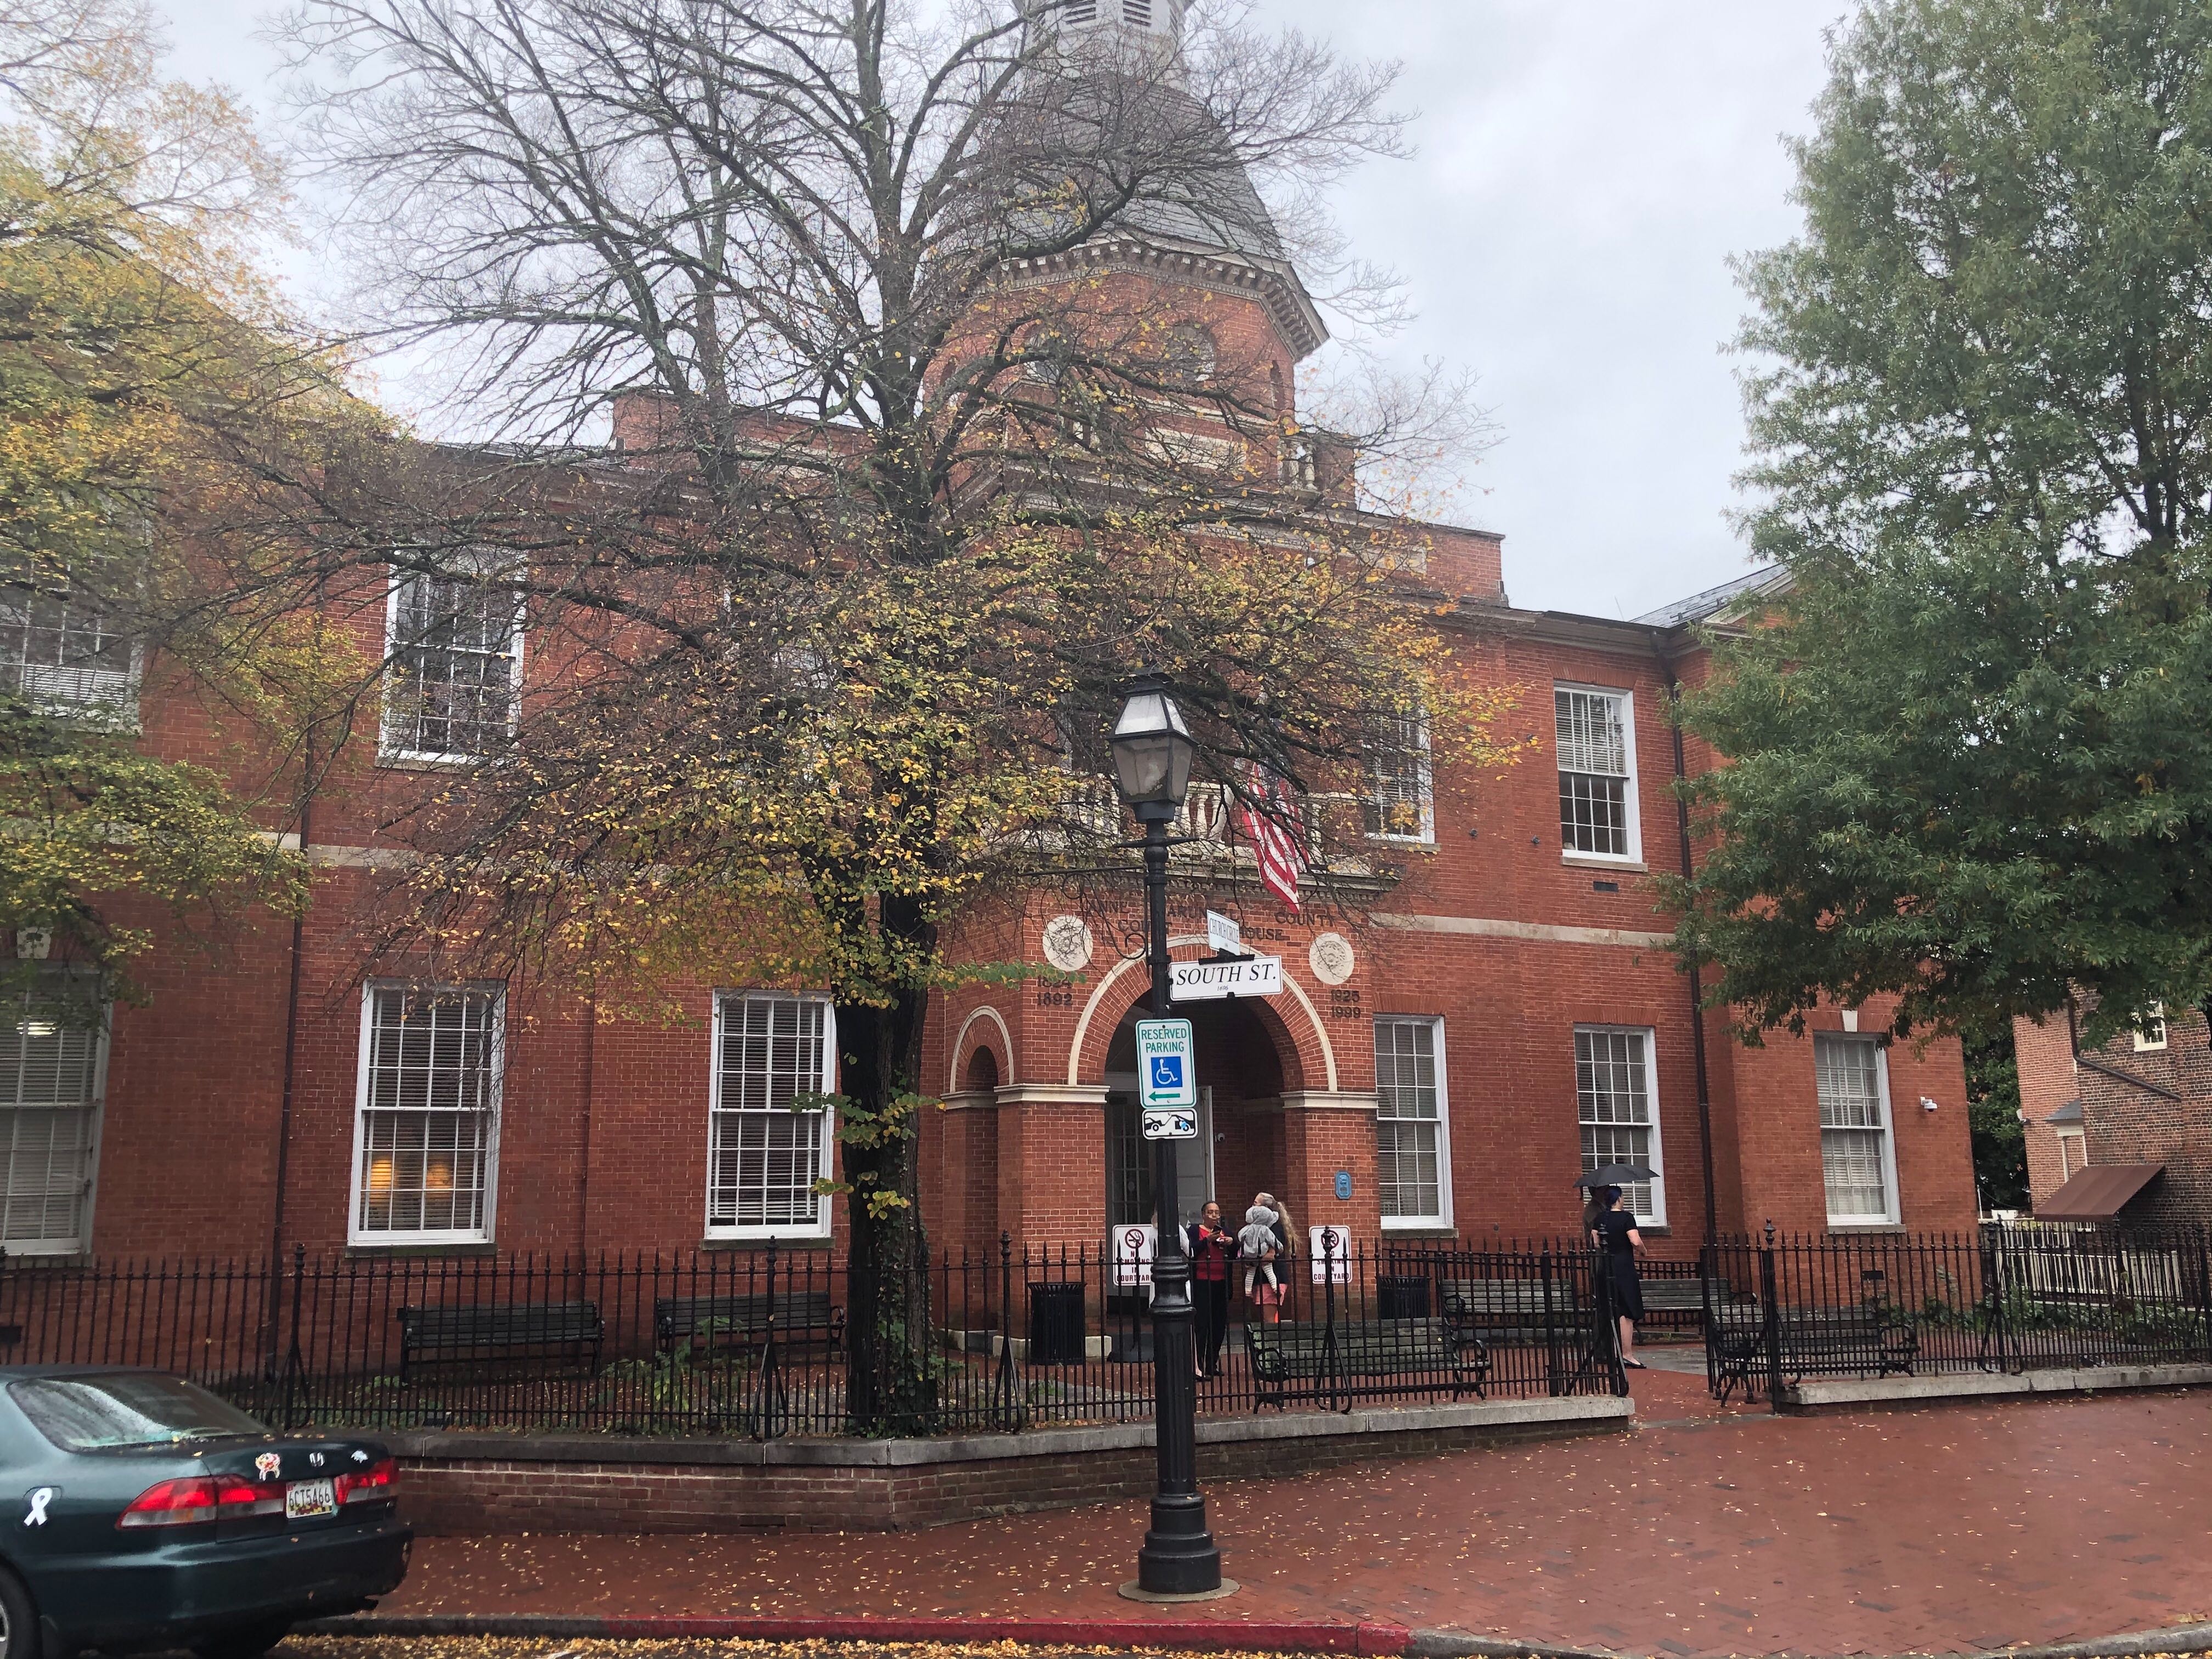 The trial determining the criminal responsibility of the gunman who perpetrated the Capital Gazette shooting will be heard in March 2020. (Capital News Service photo by Elliott Davis)